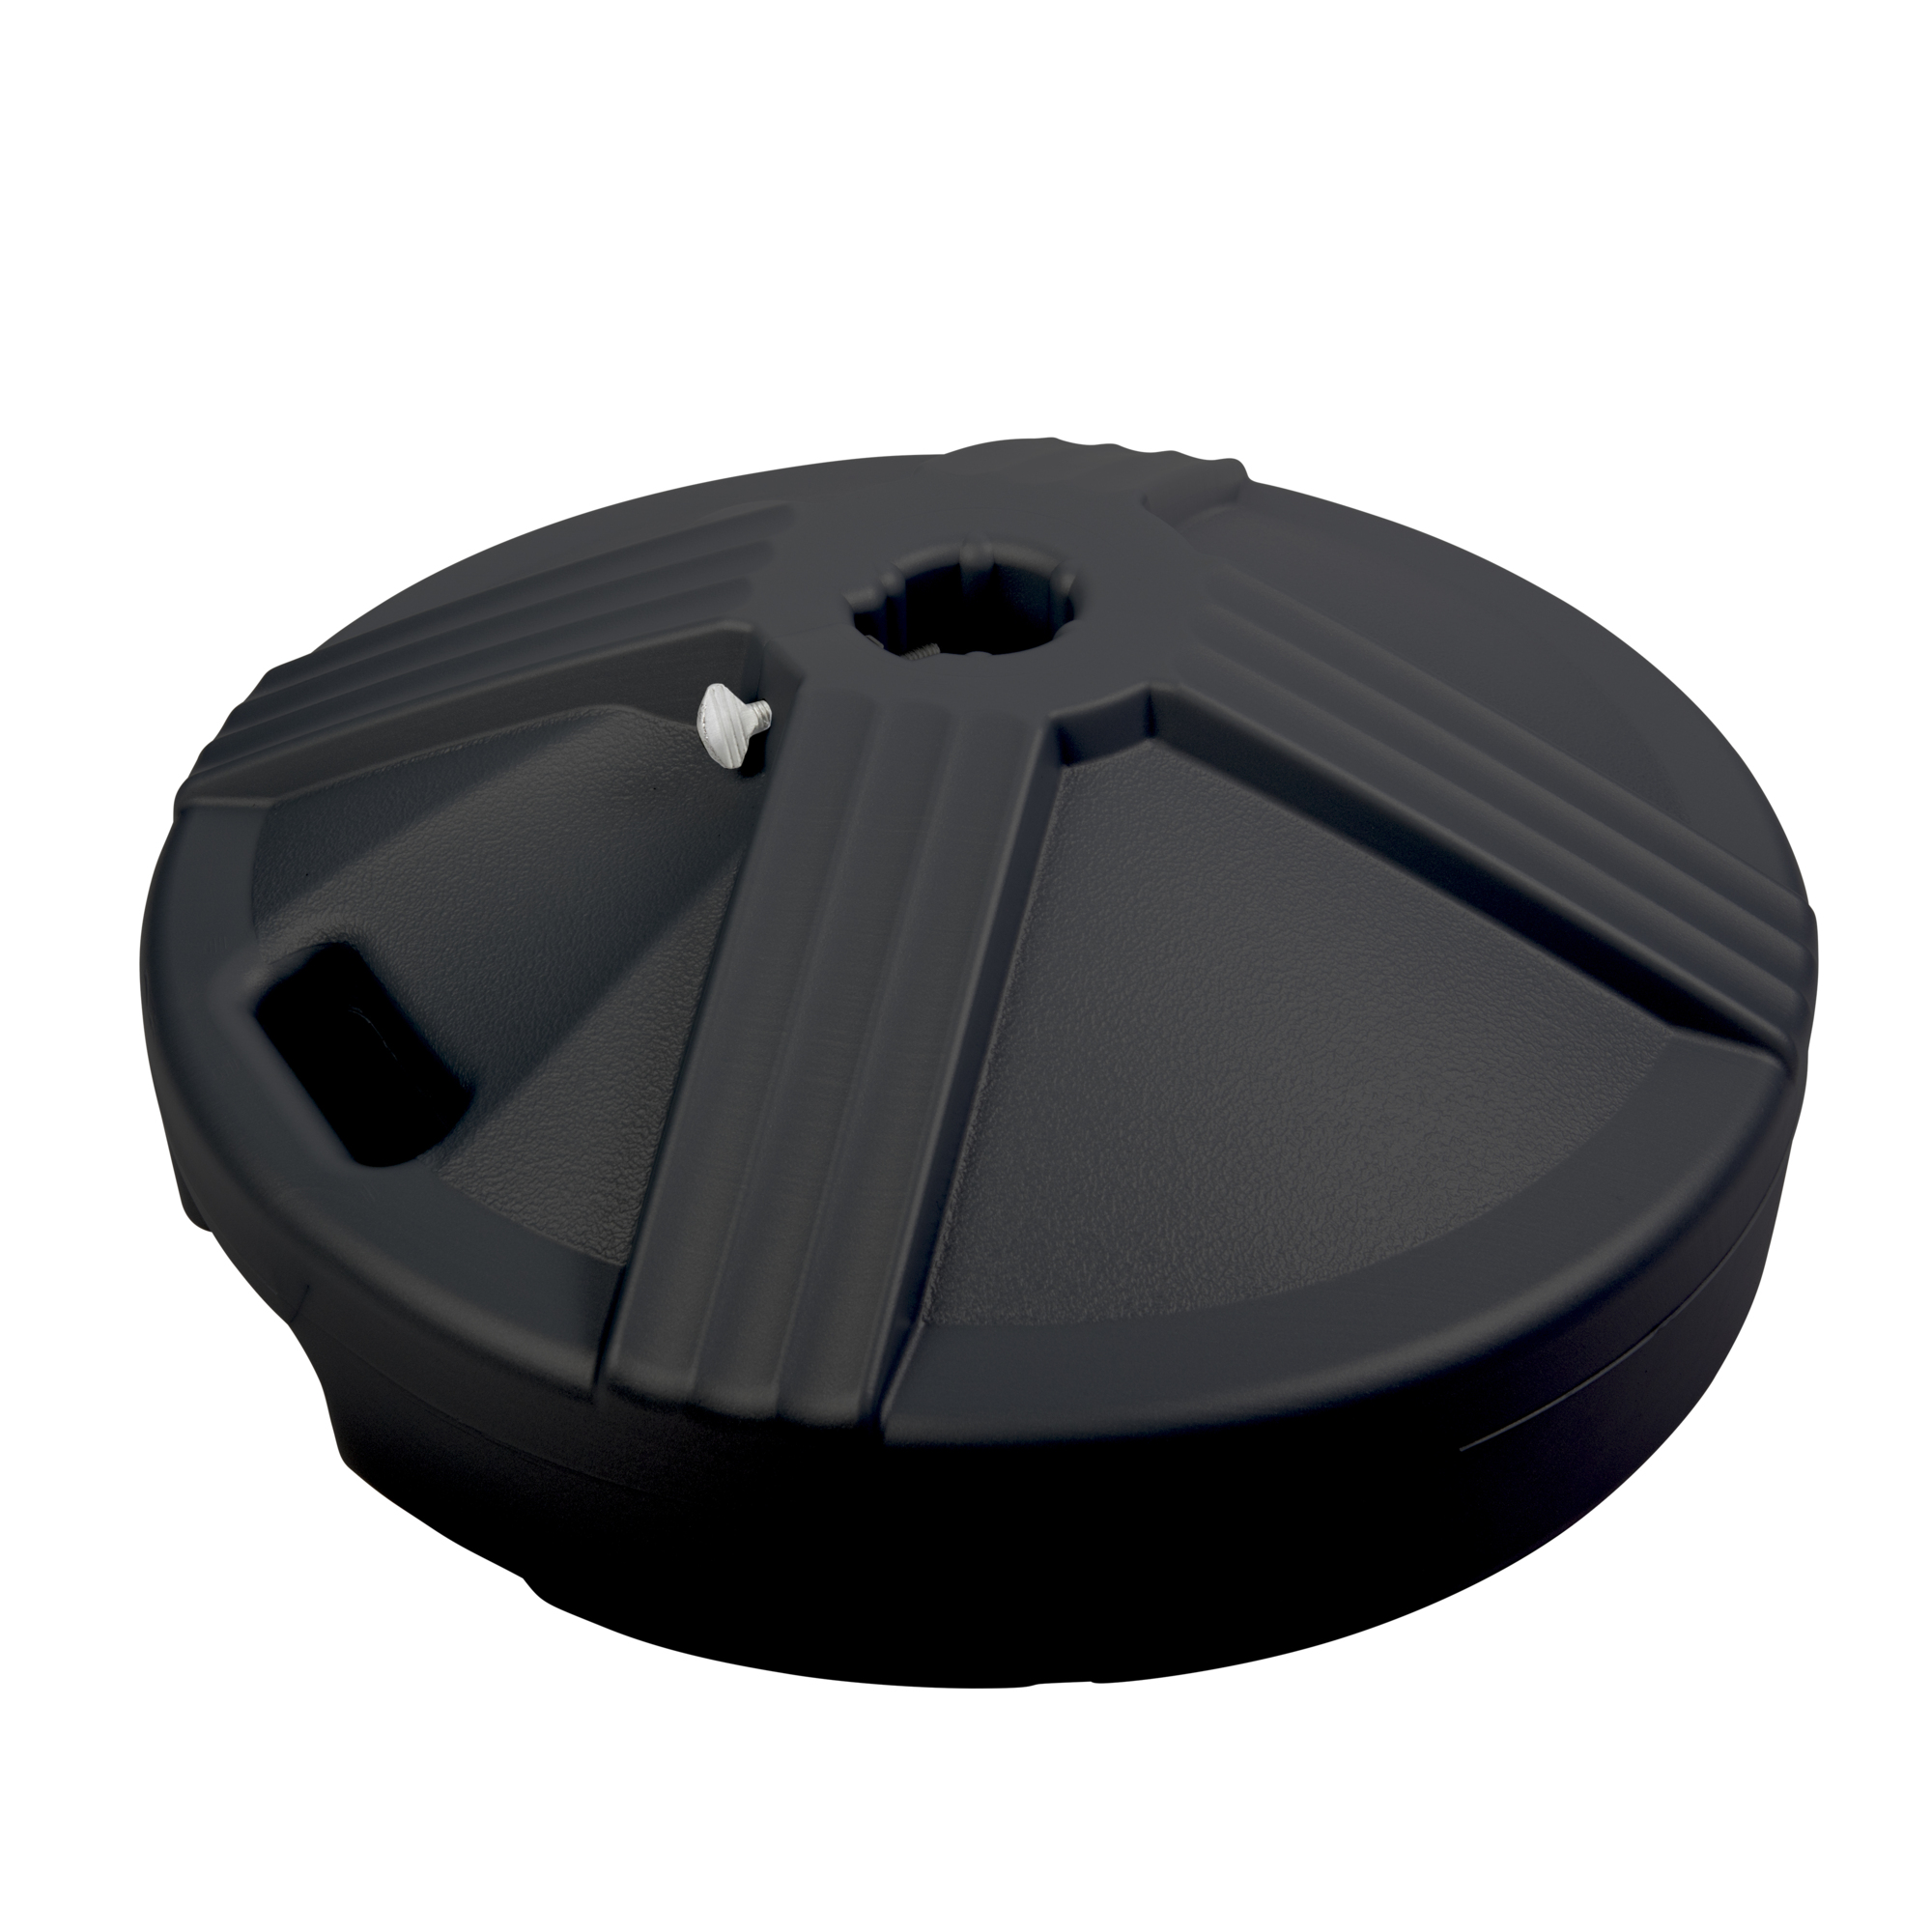 US Weight, Umbrella Base (Black) Filled to Approx. 50 lb., Included (qty.) 1 Model FUB1B